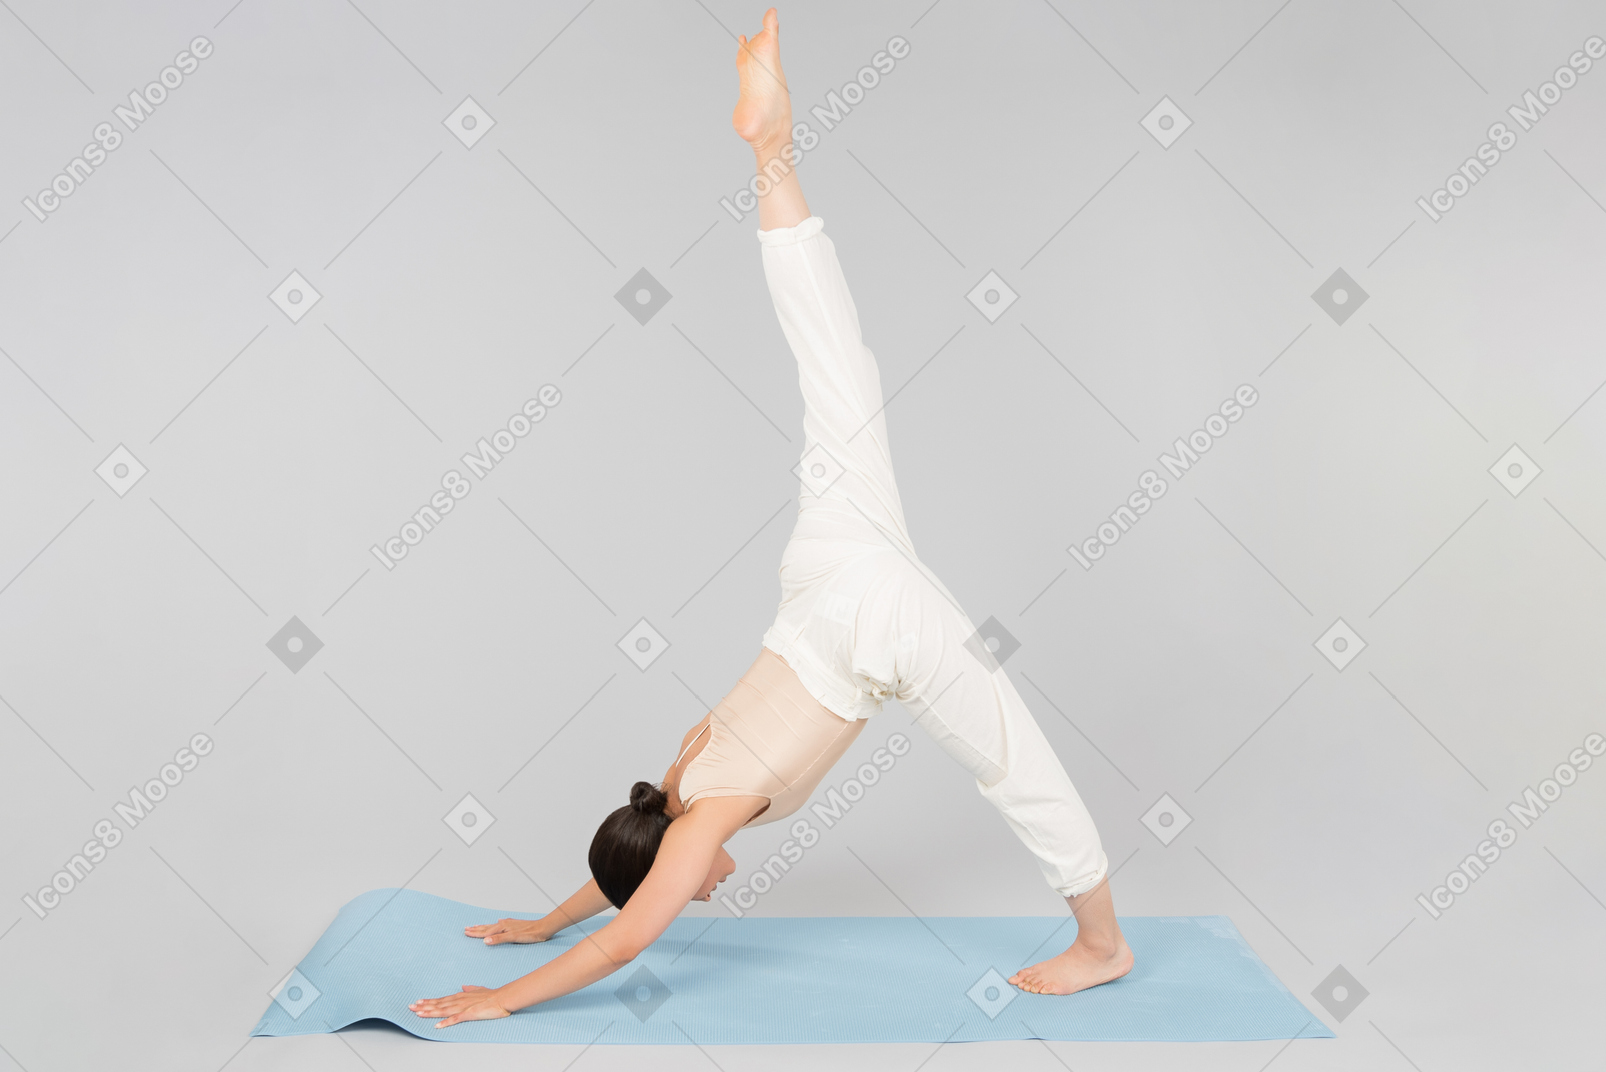 Young indian woman standing in yoga pose on yoga mat